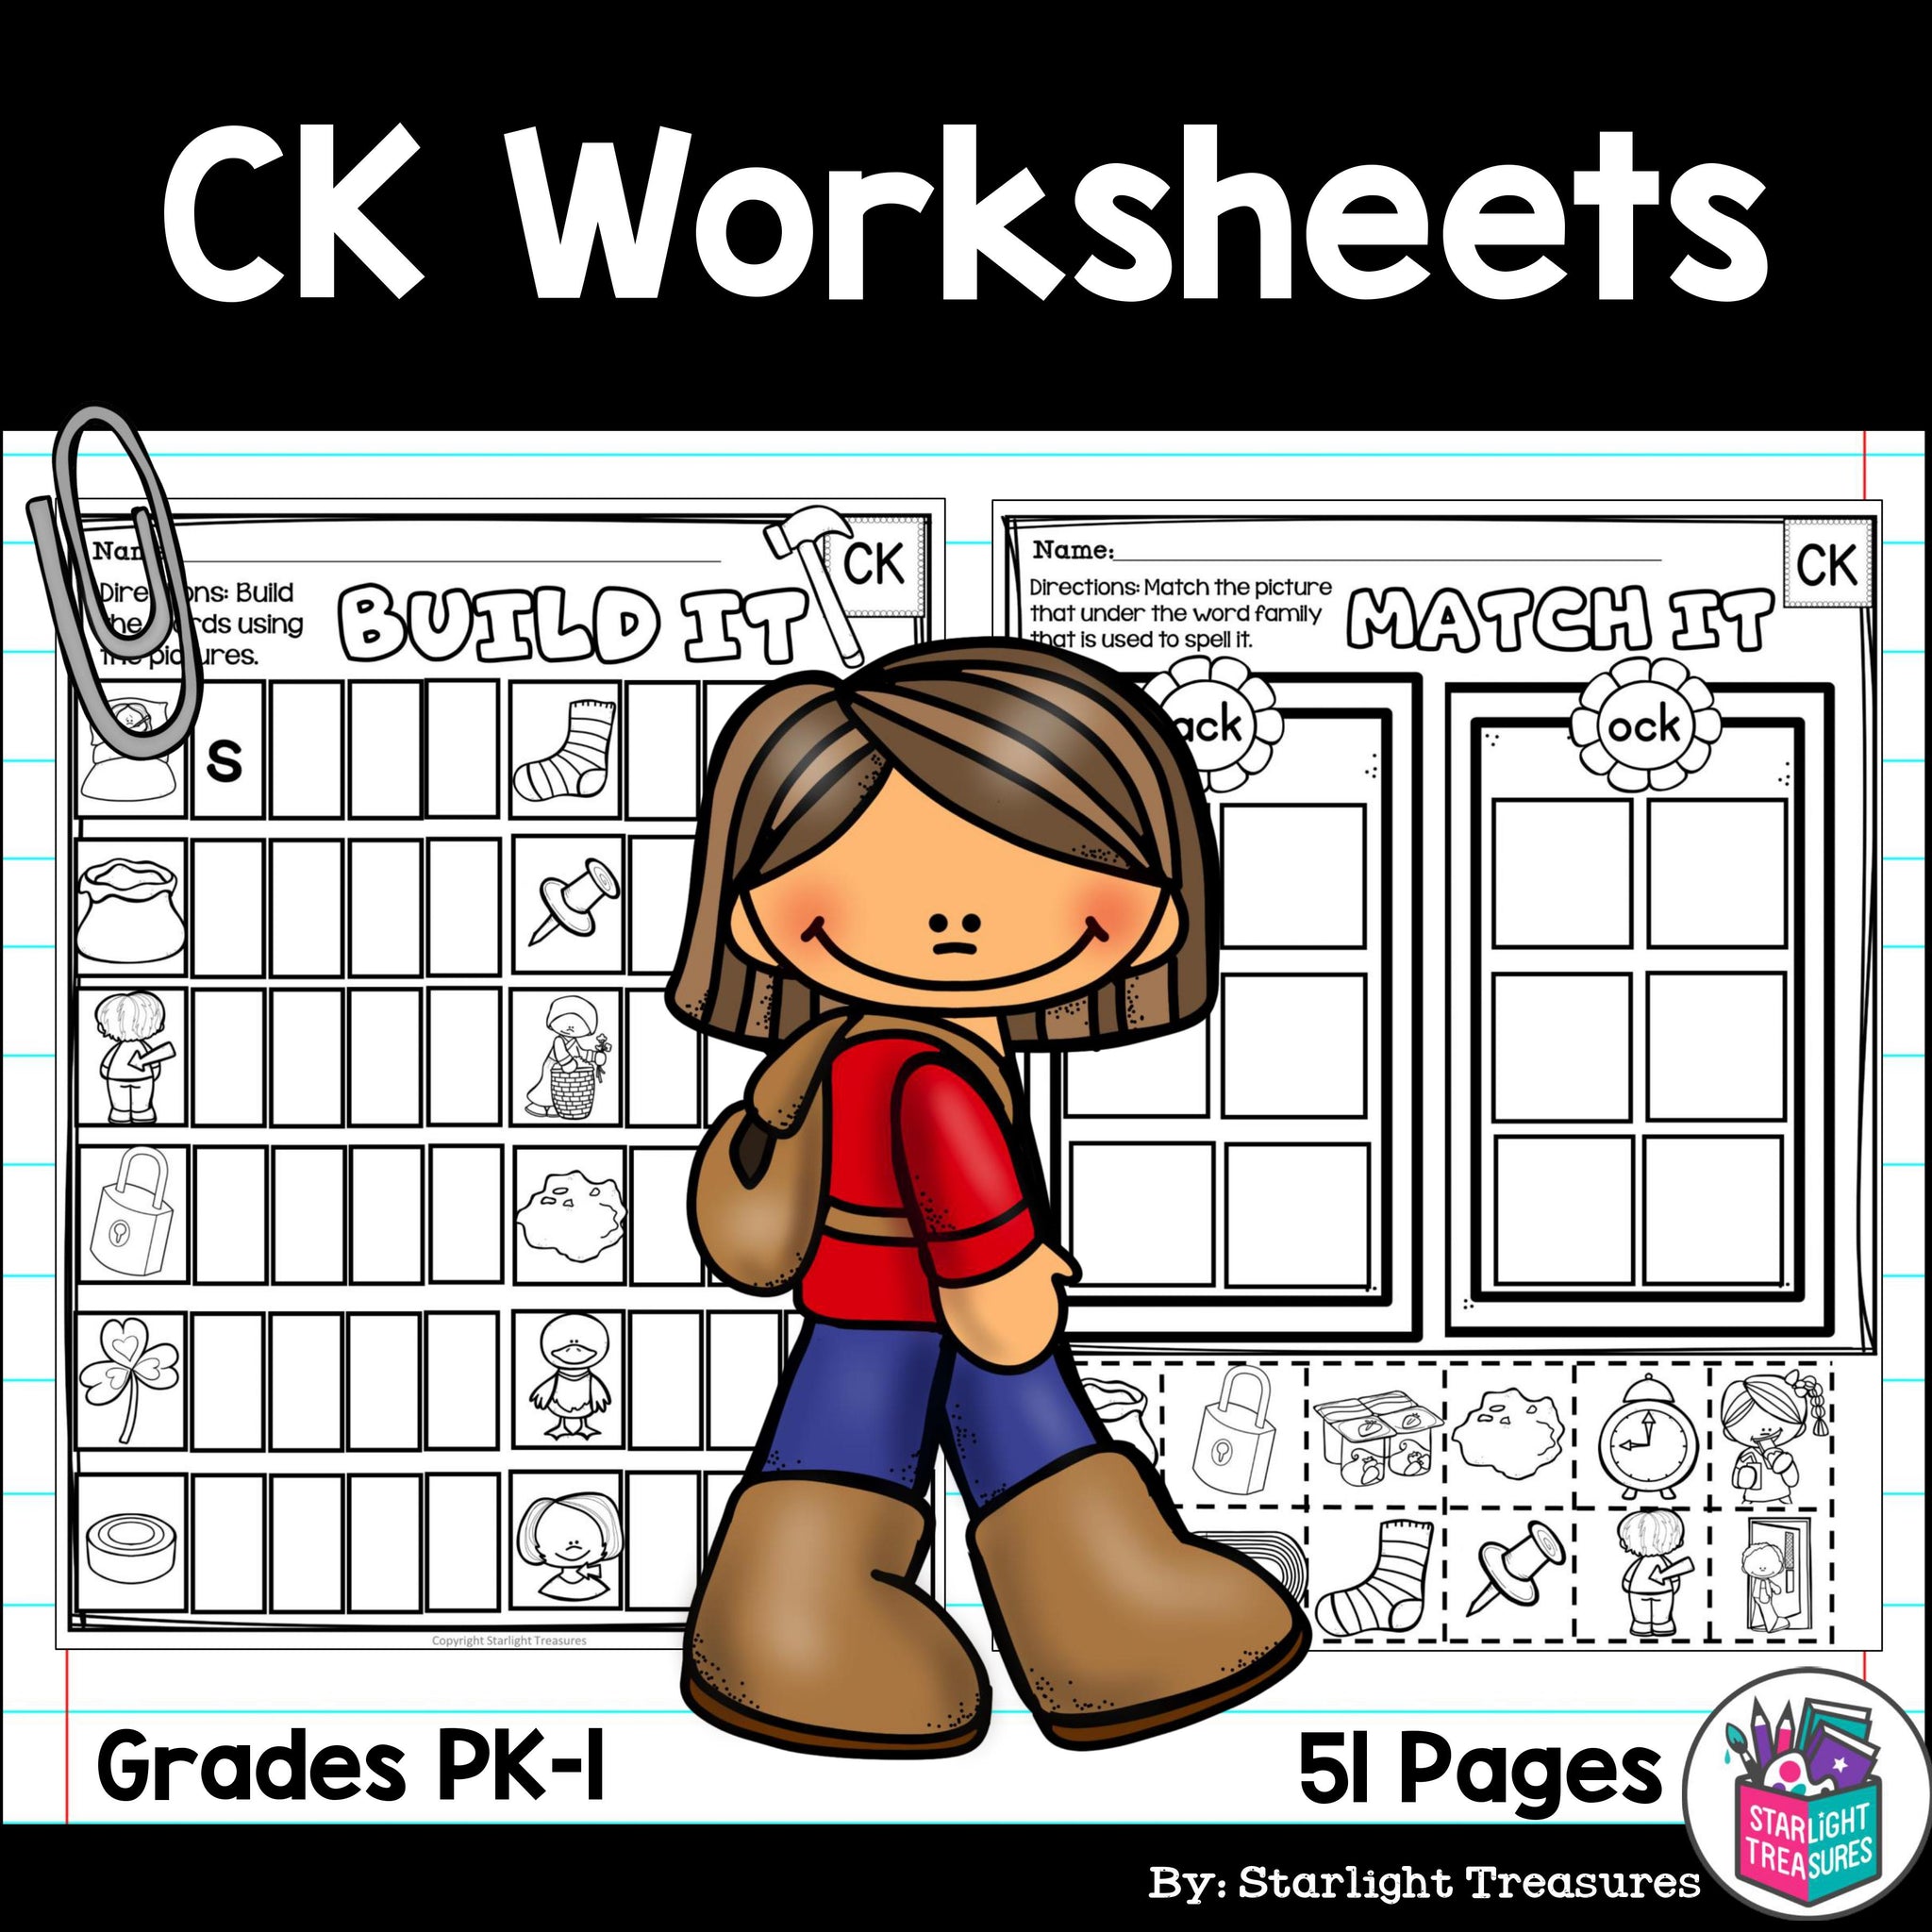 words ending in ck worksheets and activities for early readers phoni starlight treasures llc